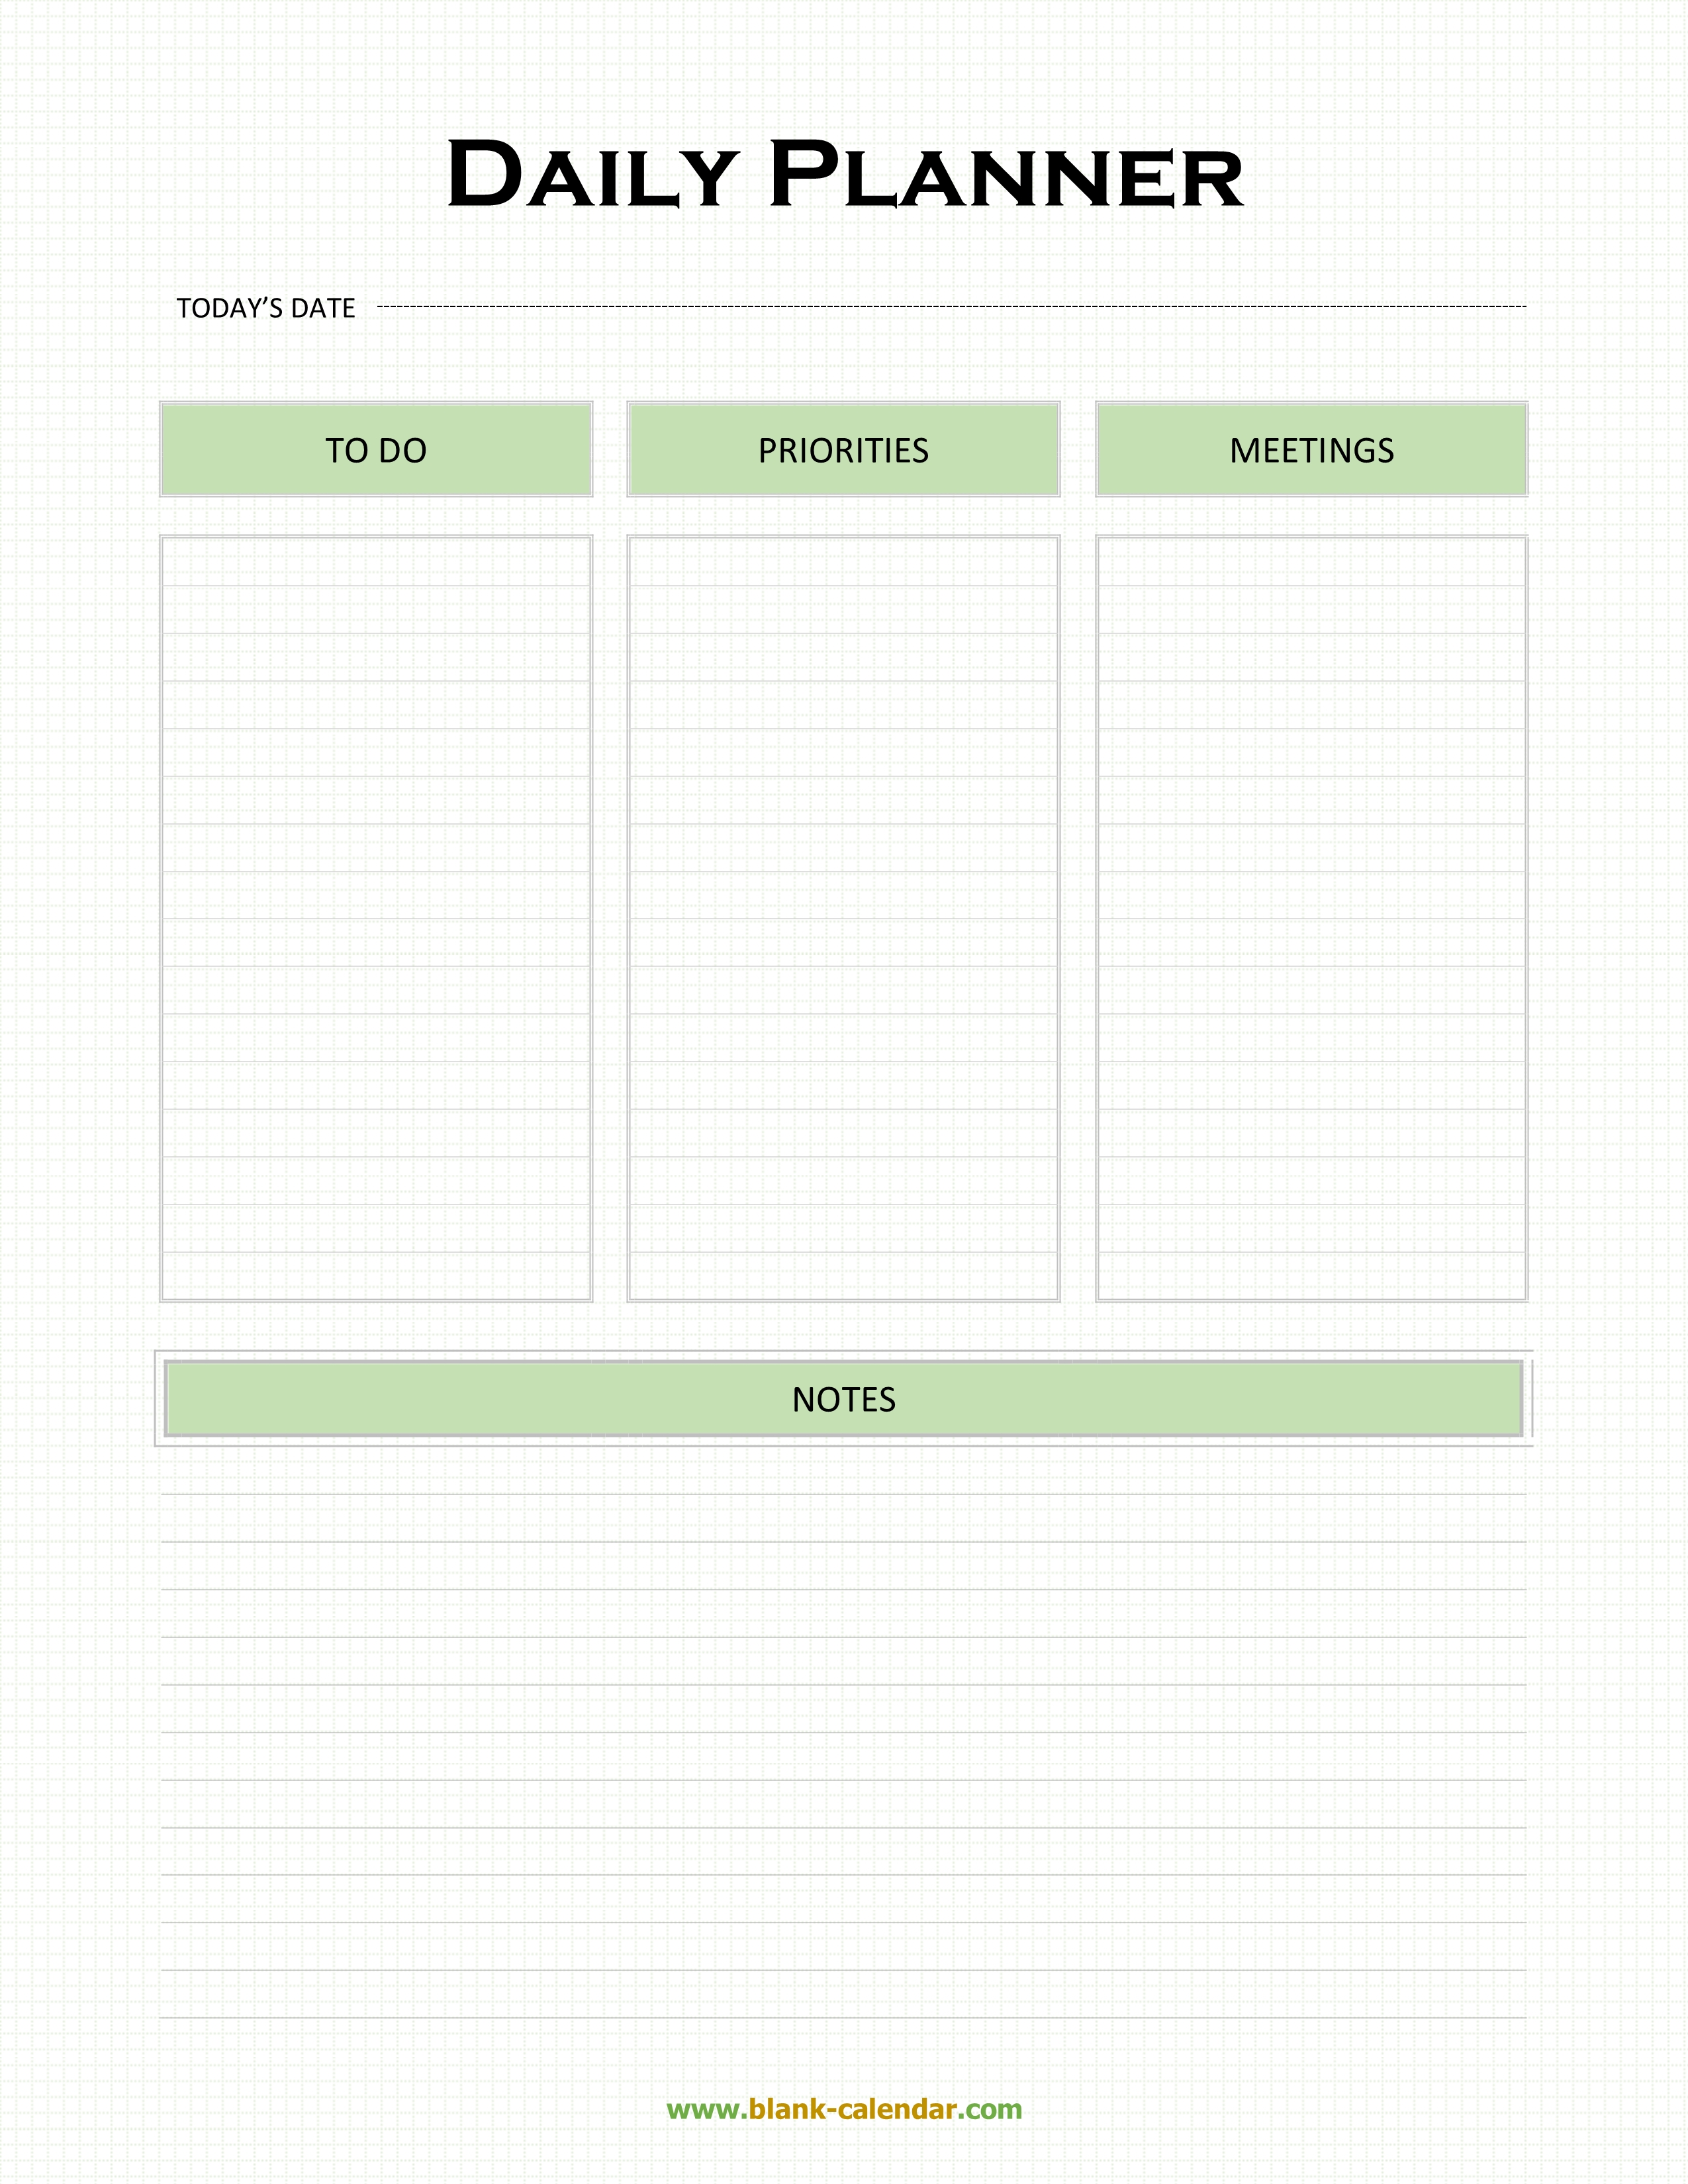 daily-planner-template-printable-free-printable-templates